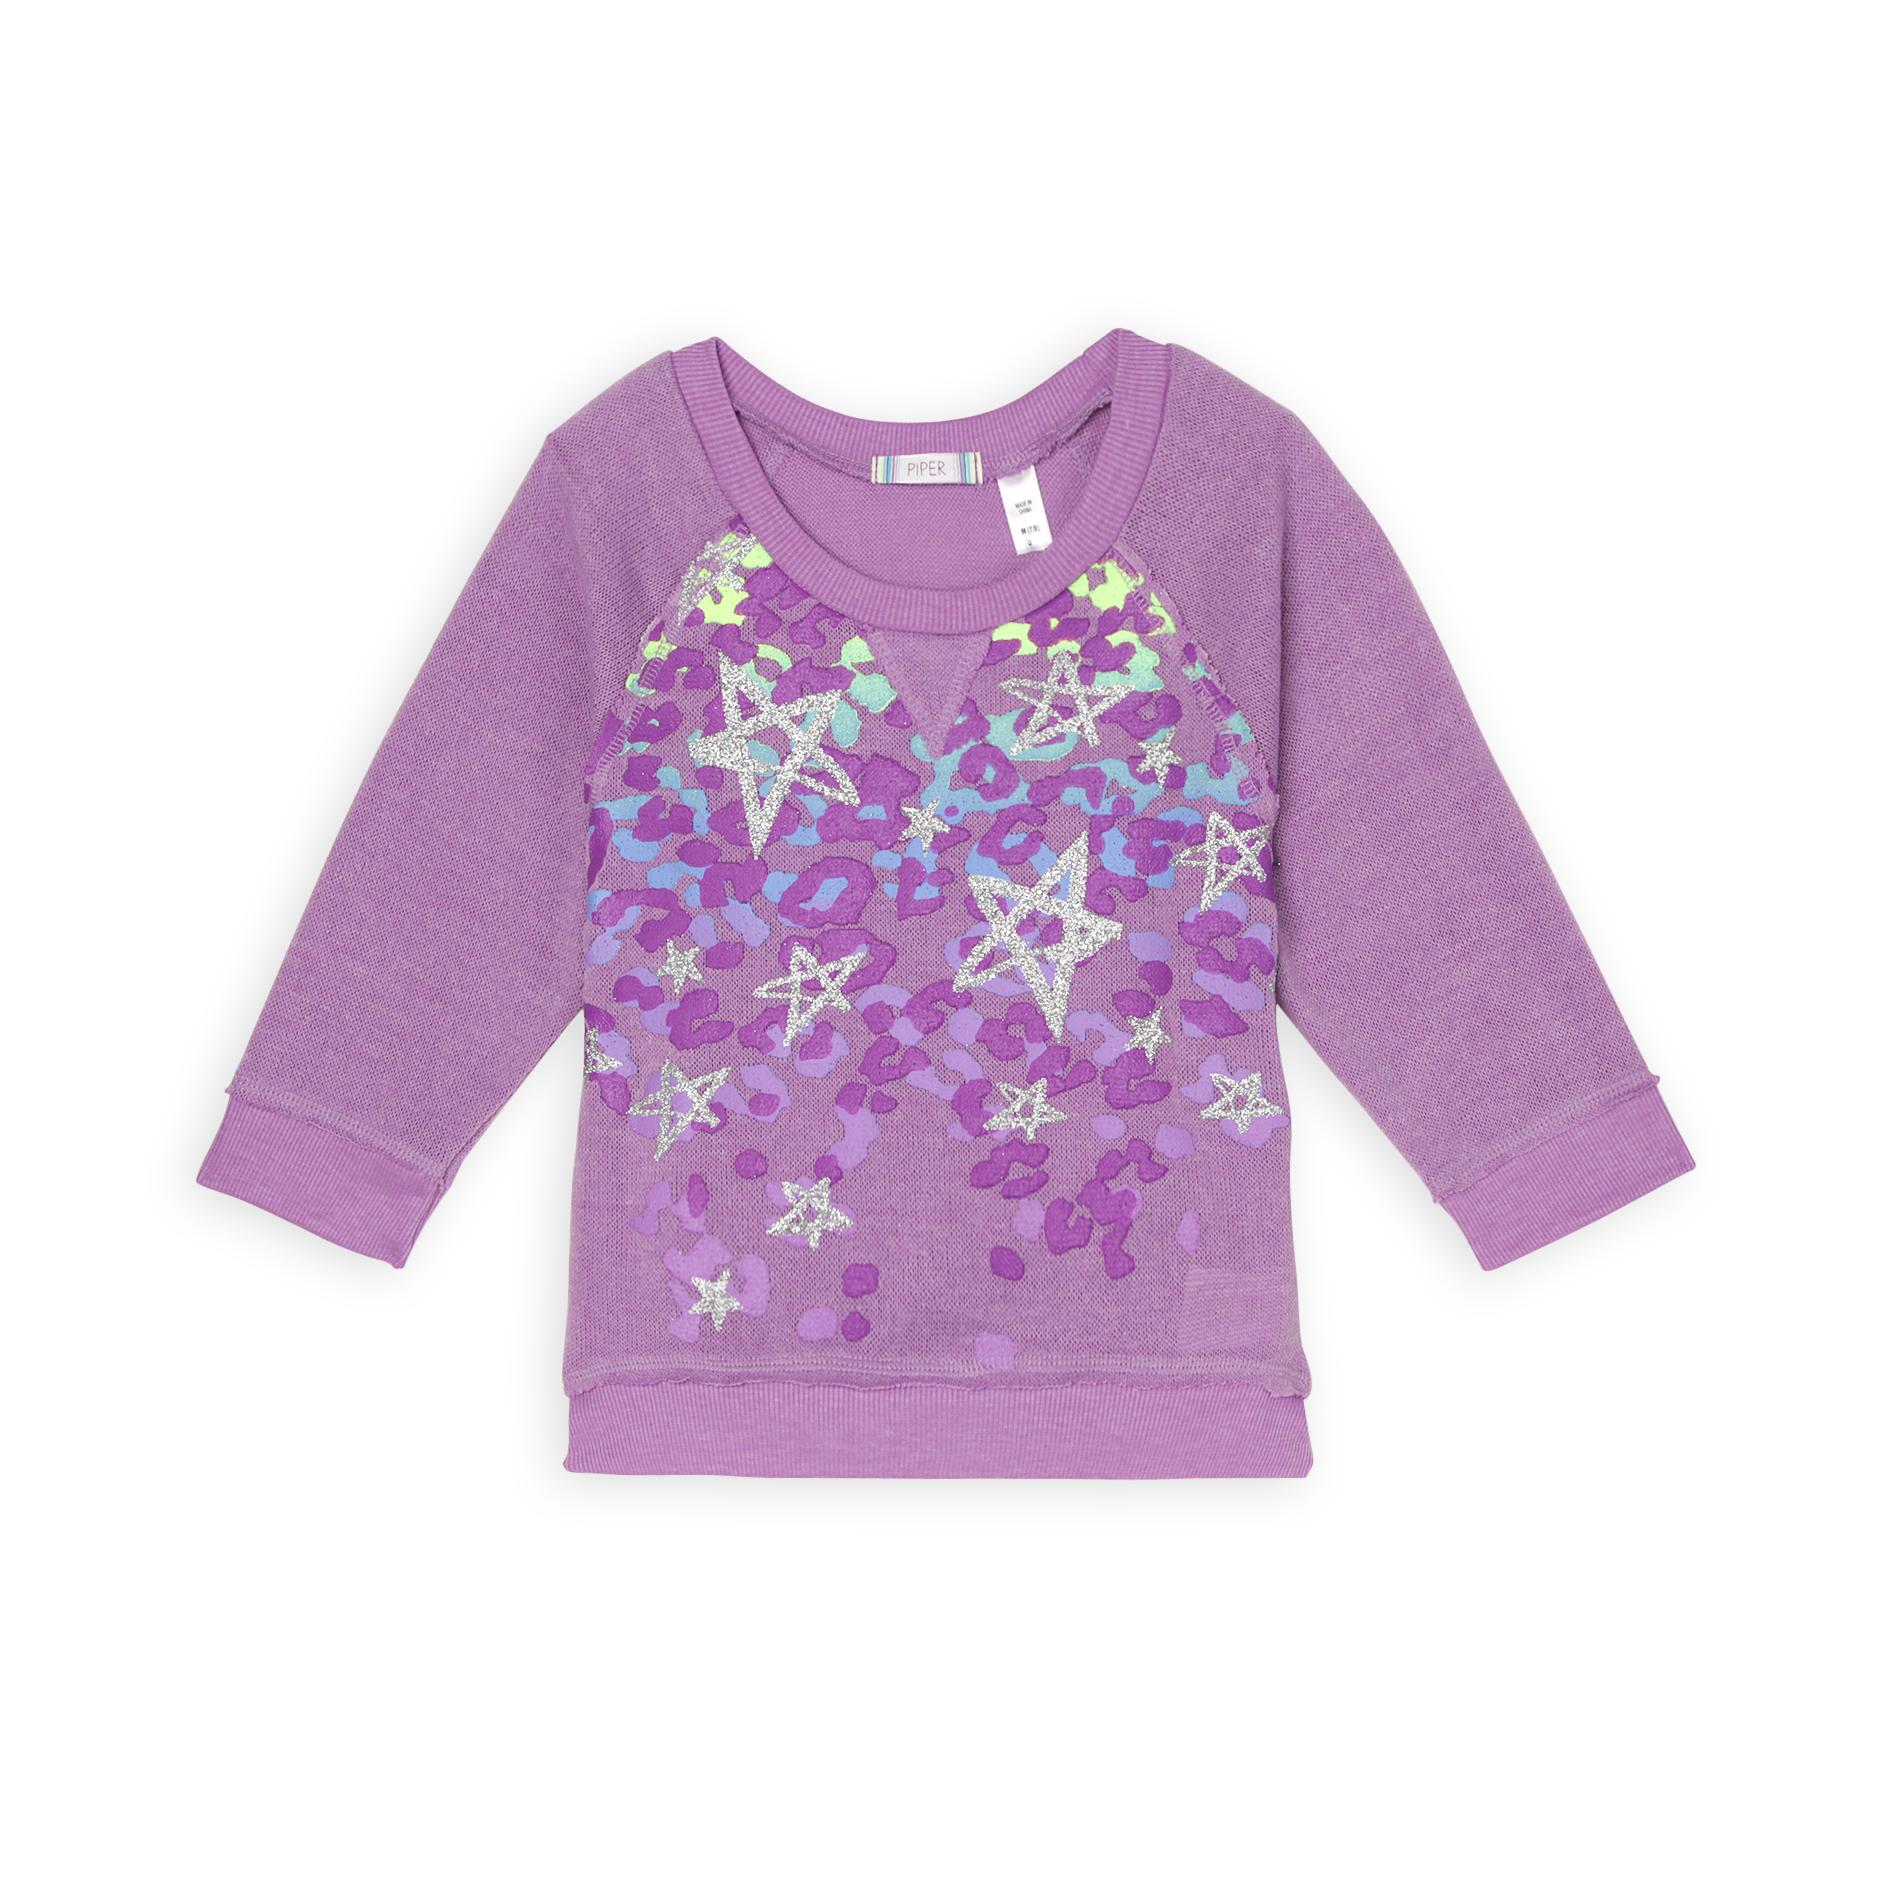 Piper Girl's Graphic Knit Top - Leopard-Print & Stars